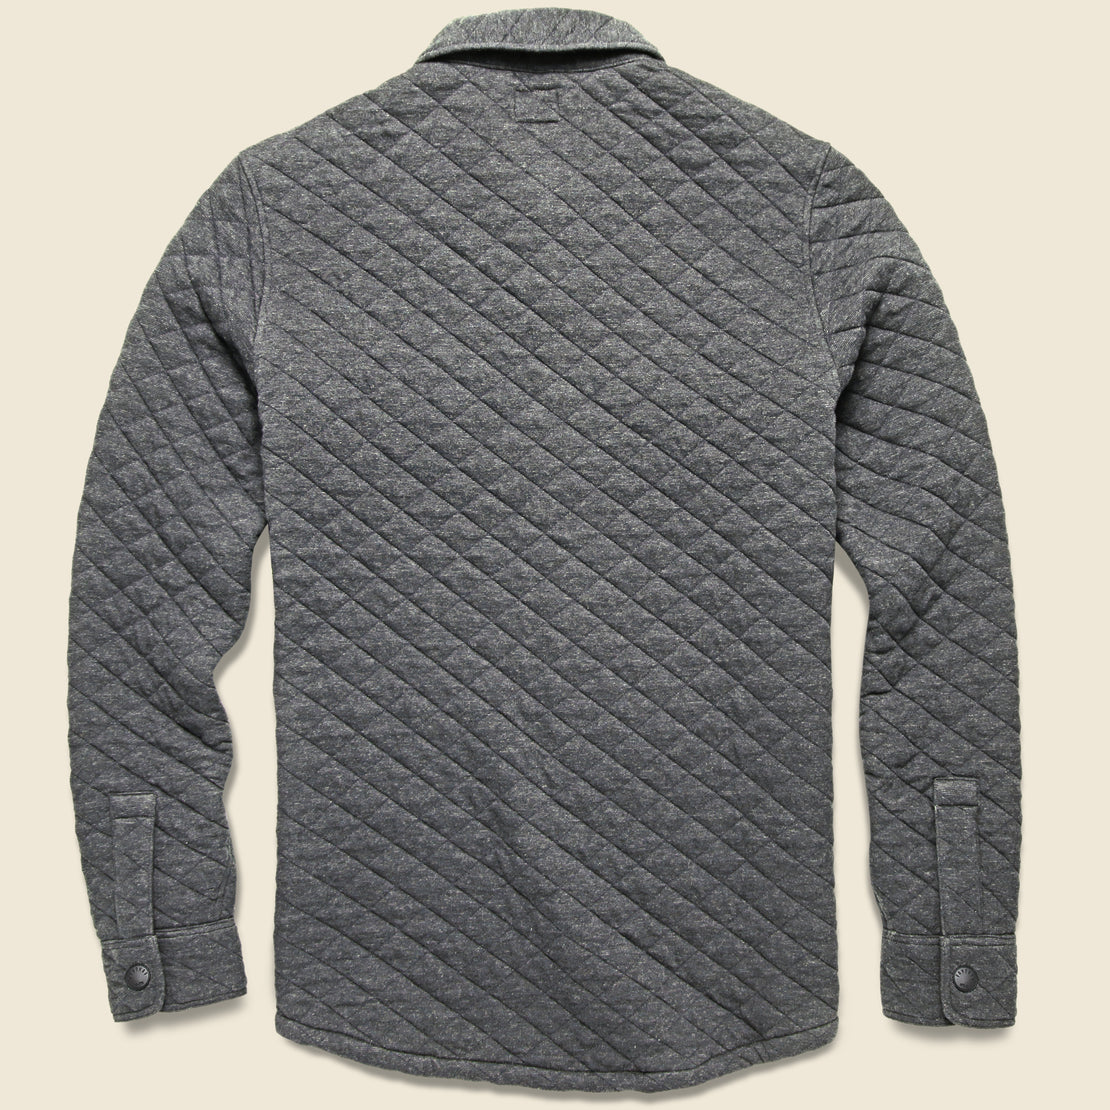 Epic Quilted Fleece CPO Shirt Jacket - Charcoal Heather - Faherty - STAG Provisions - Outerwear - Shirt Jacket